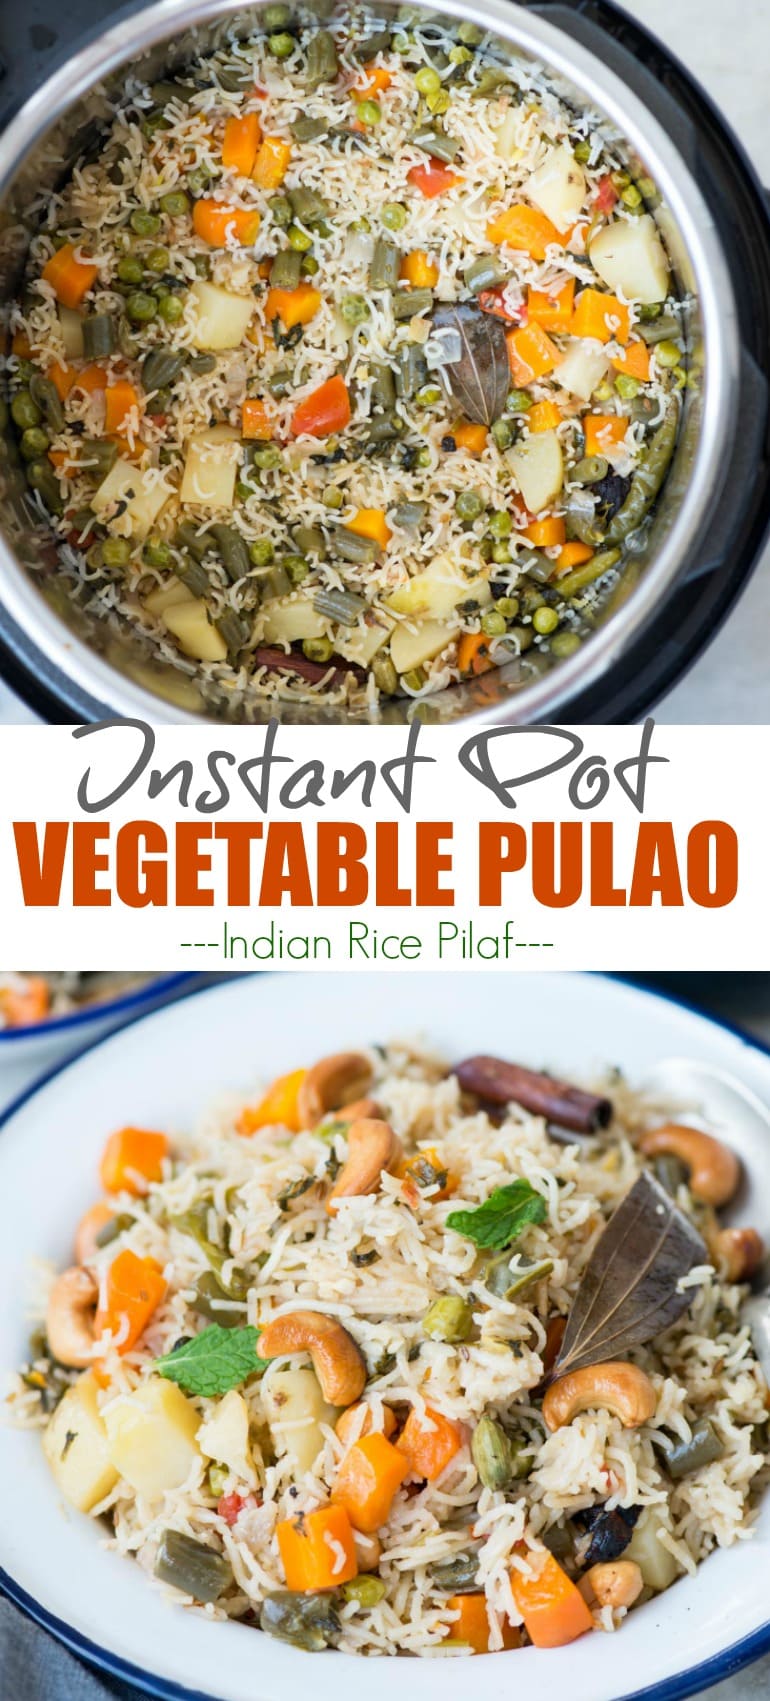 Vertical pin collage of veg pulao pics - top of pulao in instant pot, bottom pic of pulao served in a white plate.